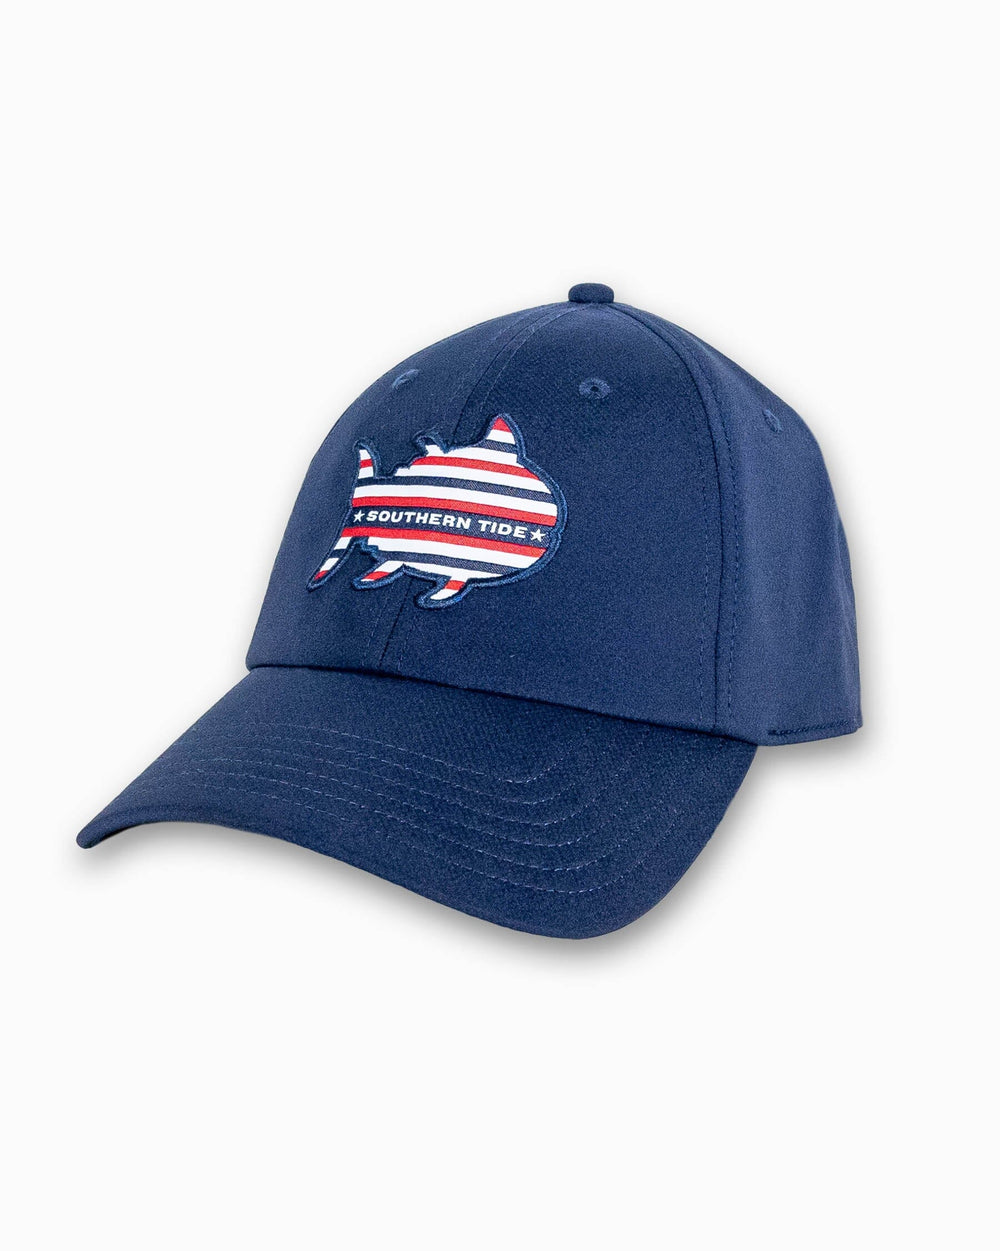 The front view of the Southern Tide Rockets Red Glare Performance Hat by Southern Tide - Navy